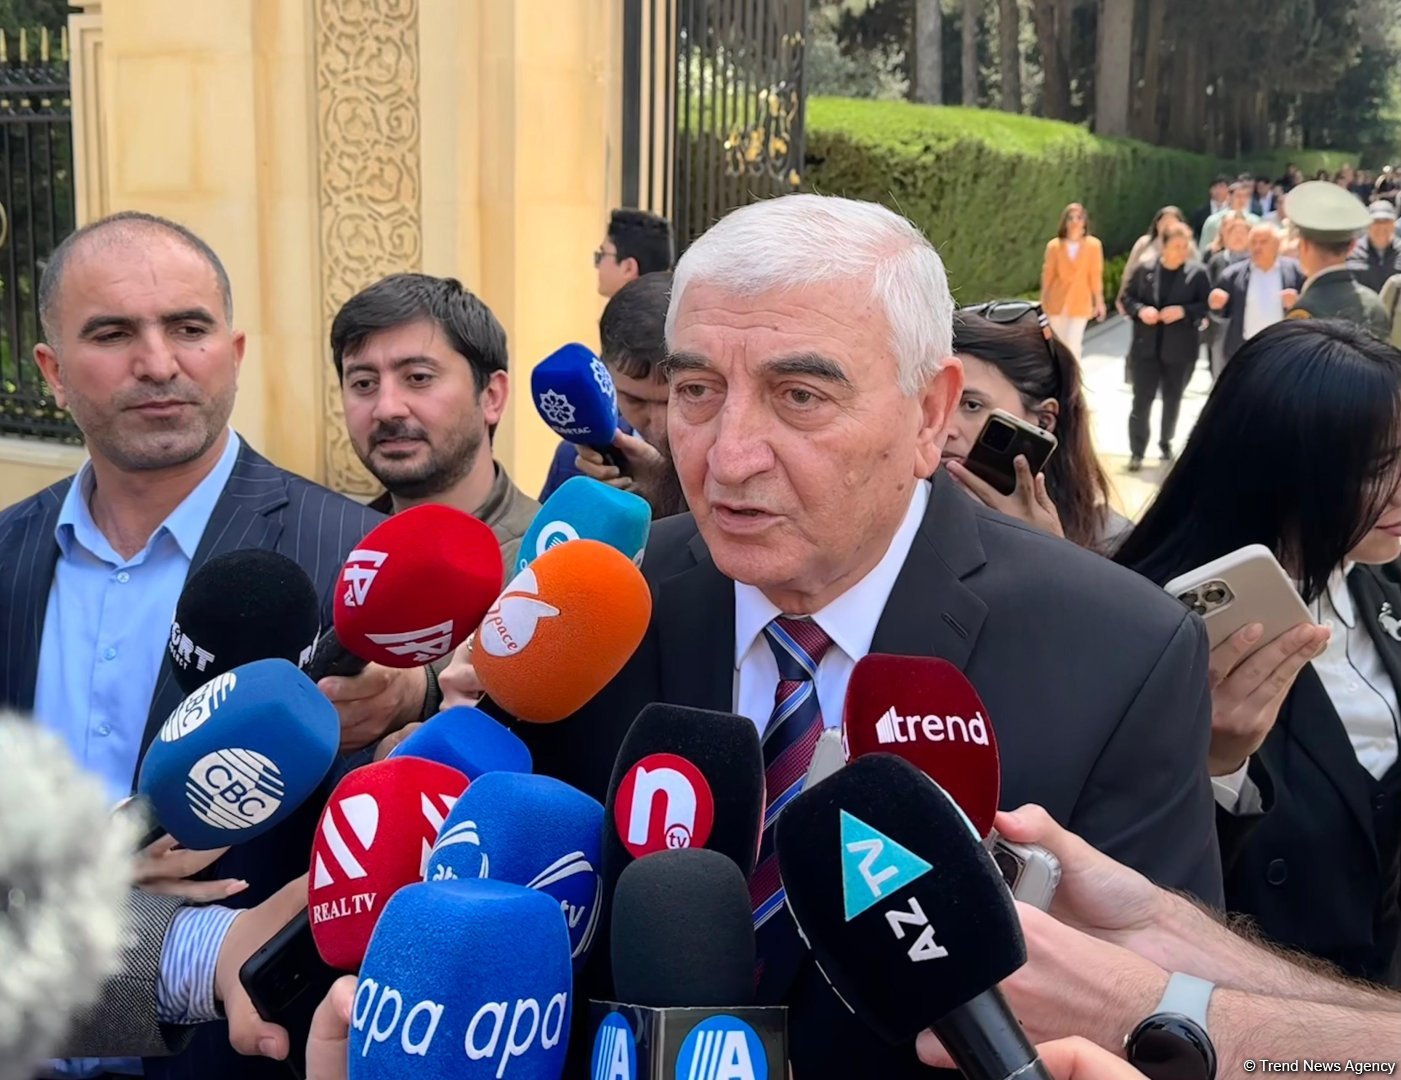 Azerbaijan's parliamentary election likely to be held earlier - CEC chair